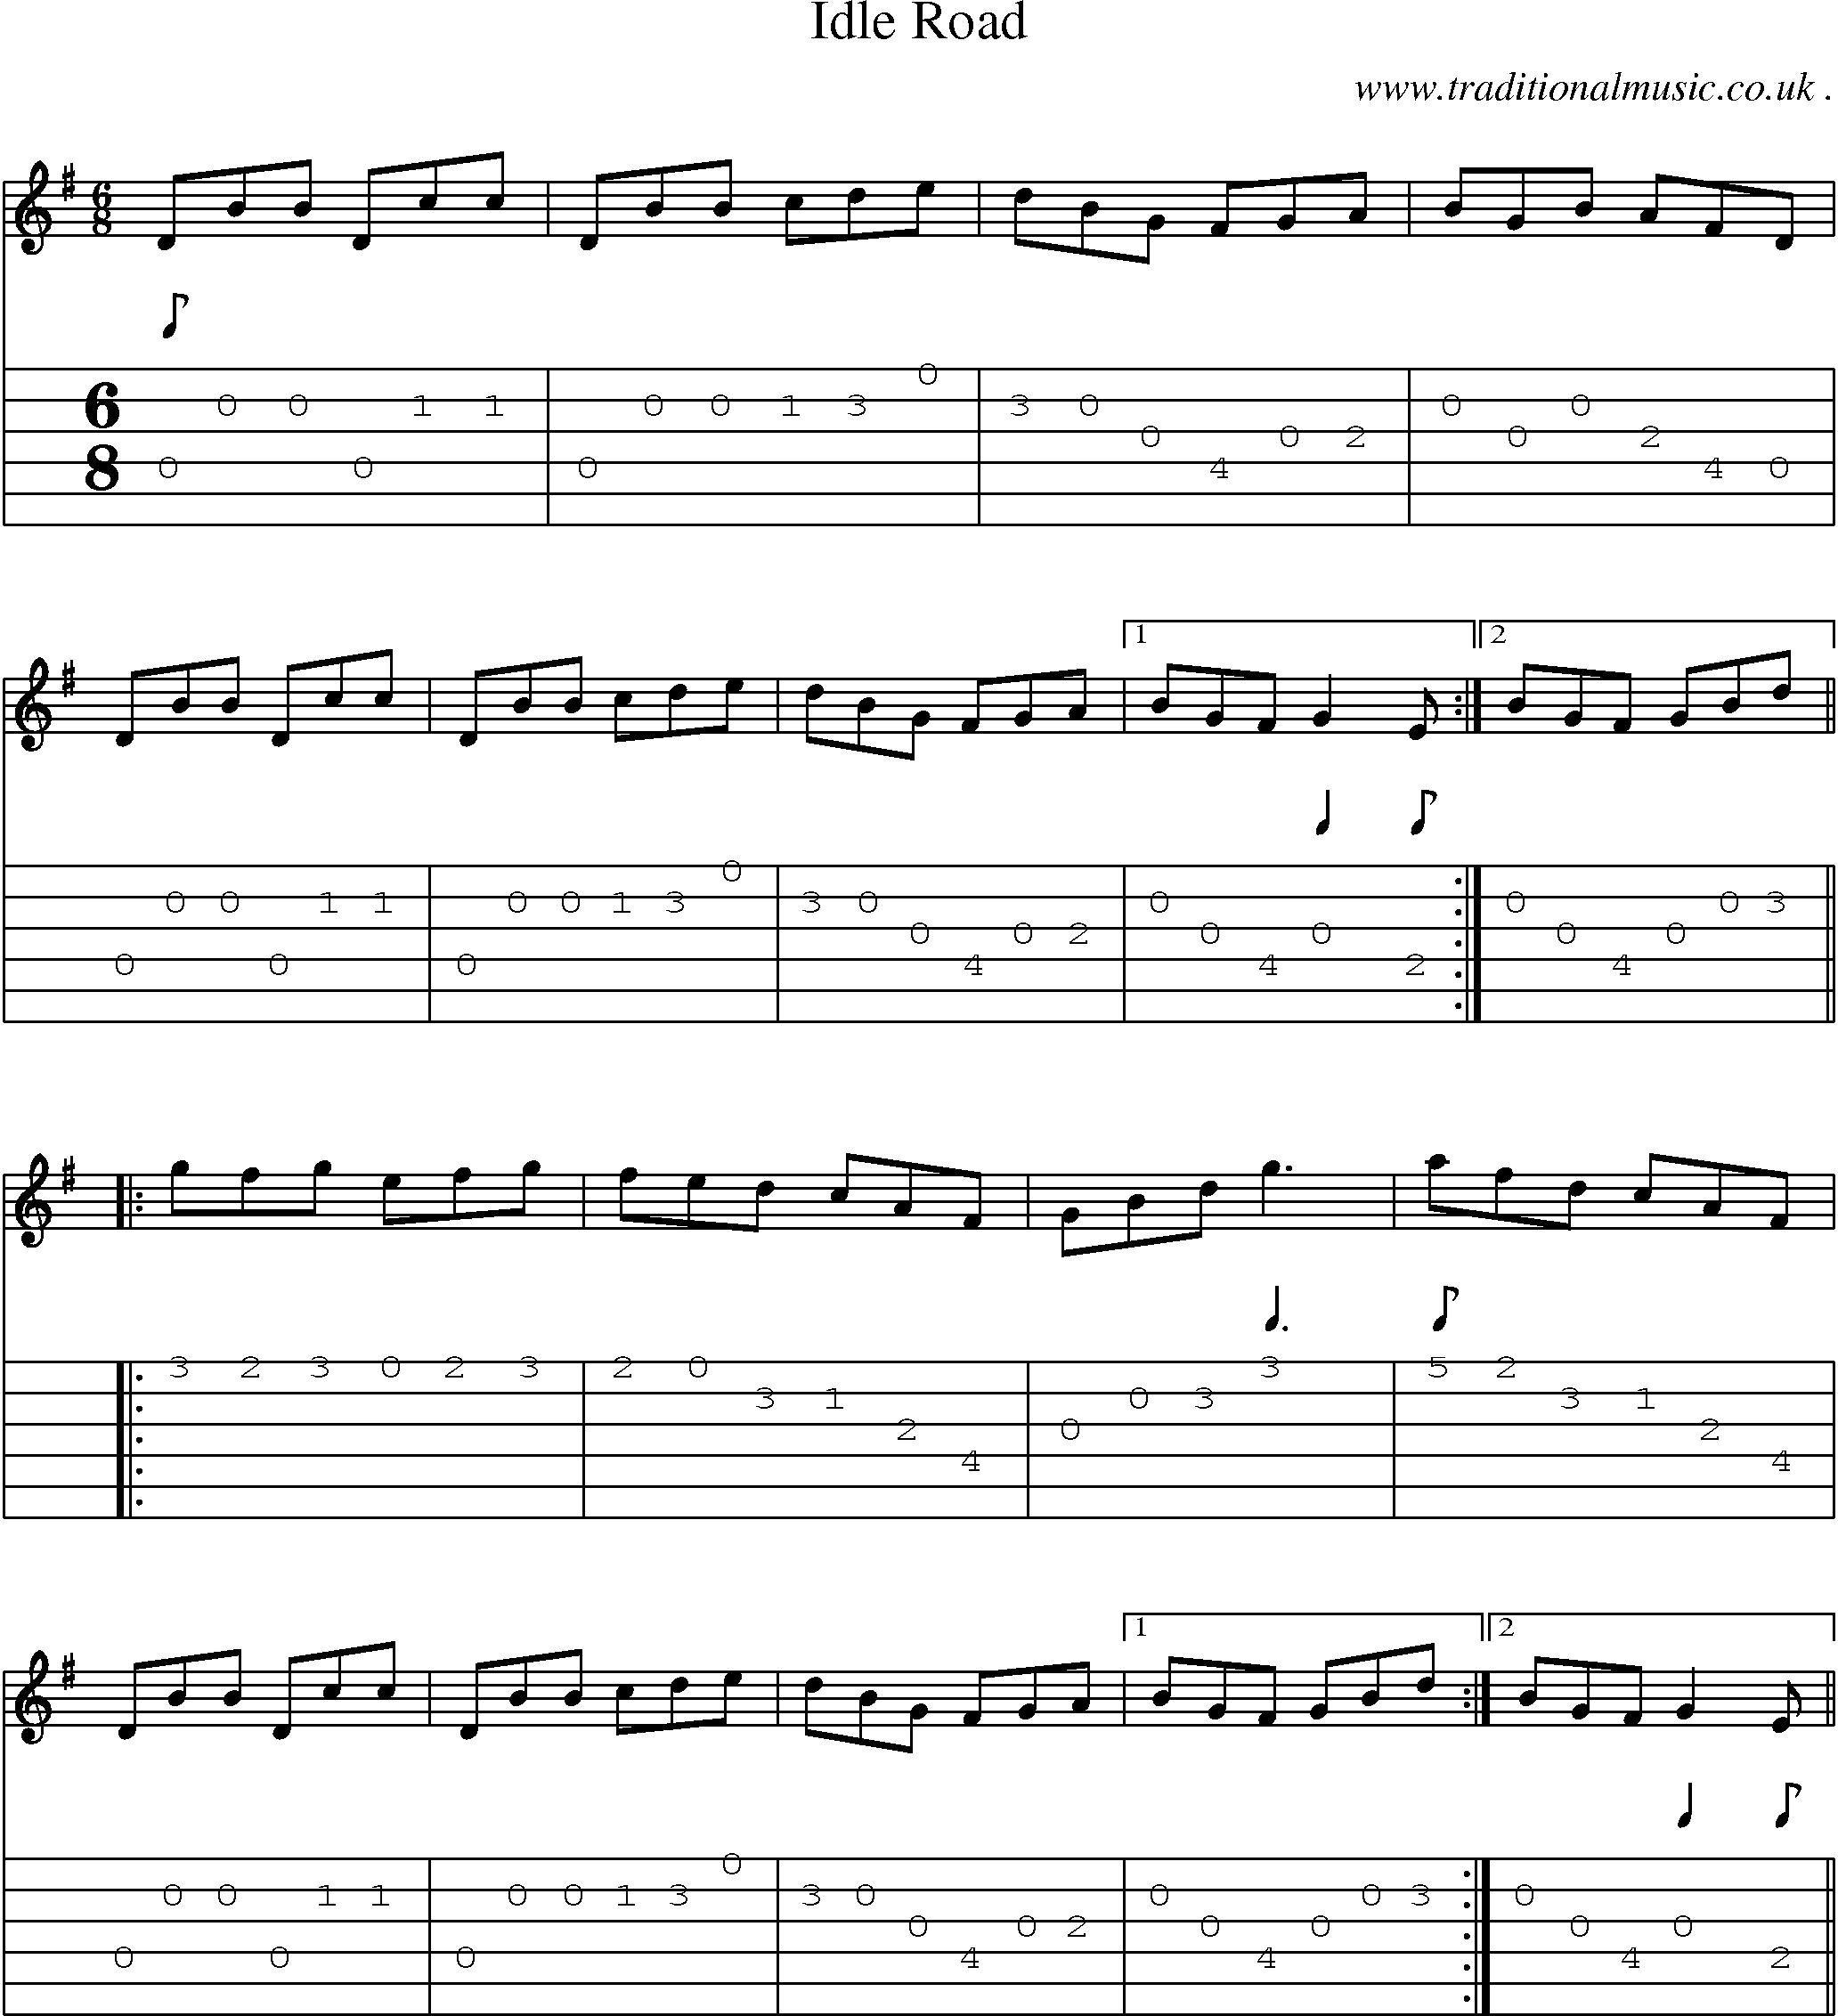 Sheet-Music and Guitar Tabs for Idle Road